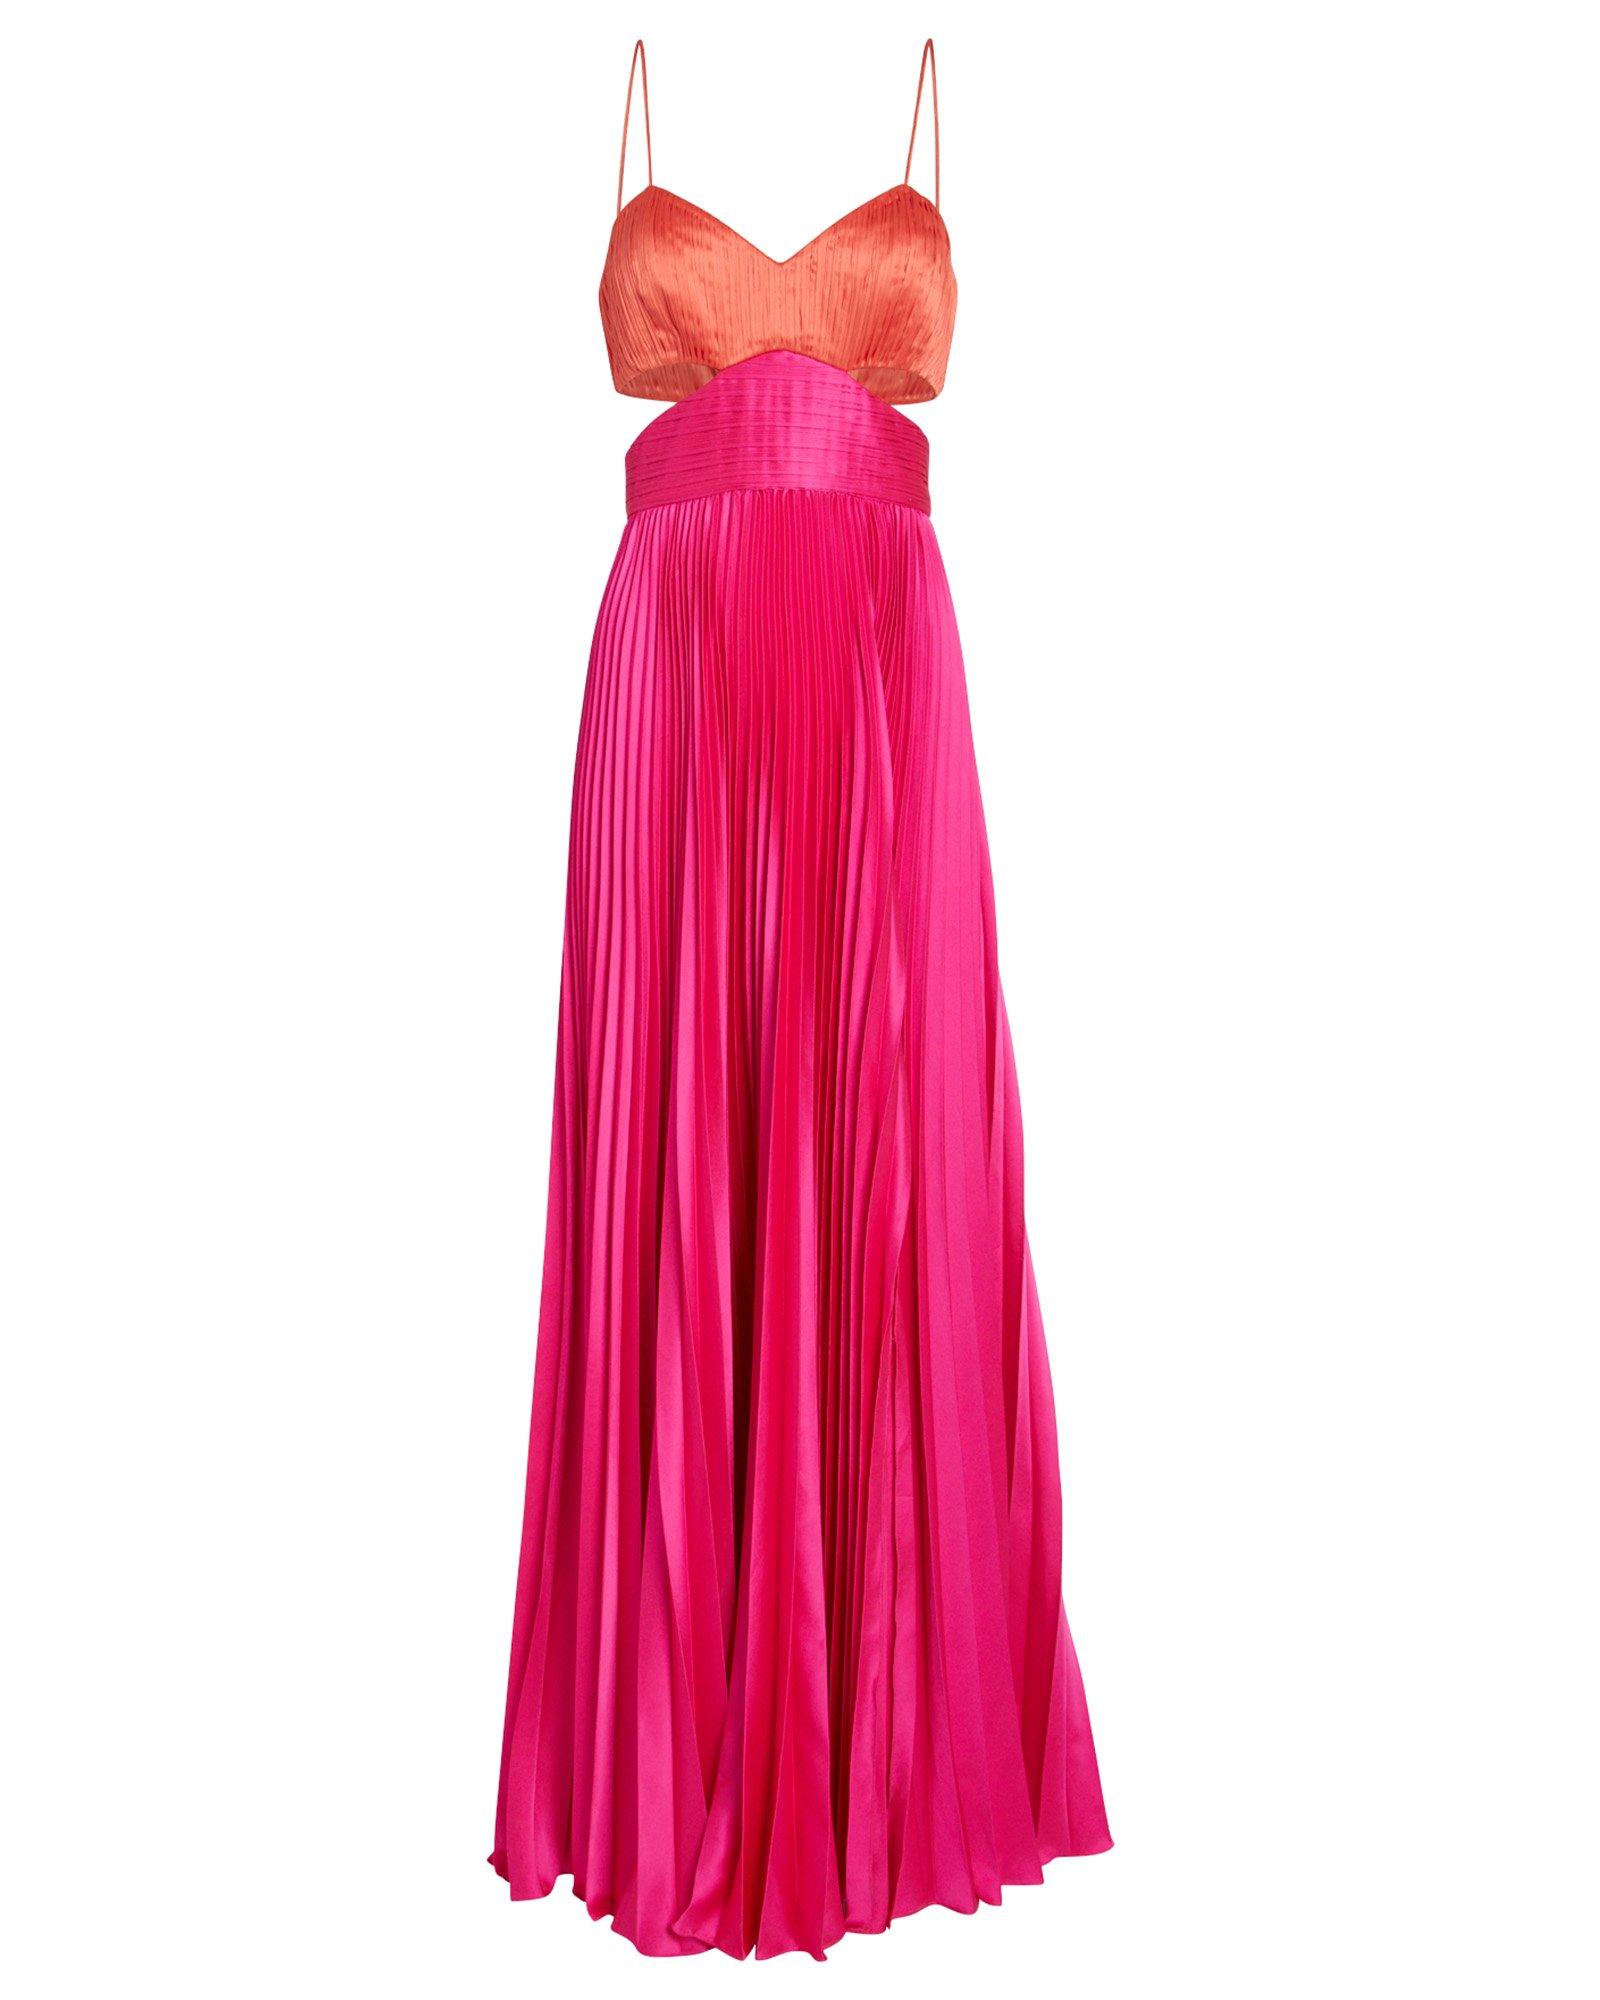 AMUR Elodie Colorblock Satin Gown in Pink - Lyst